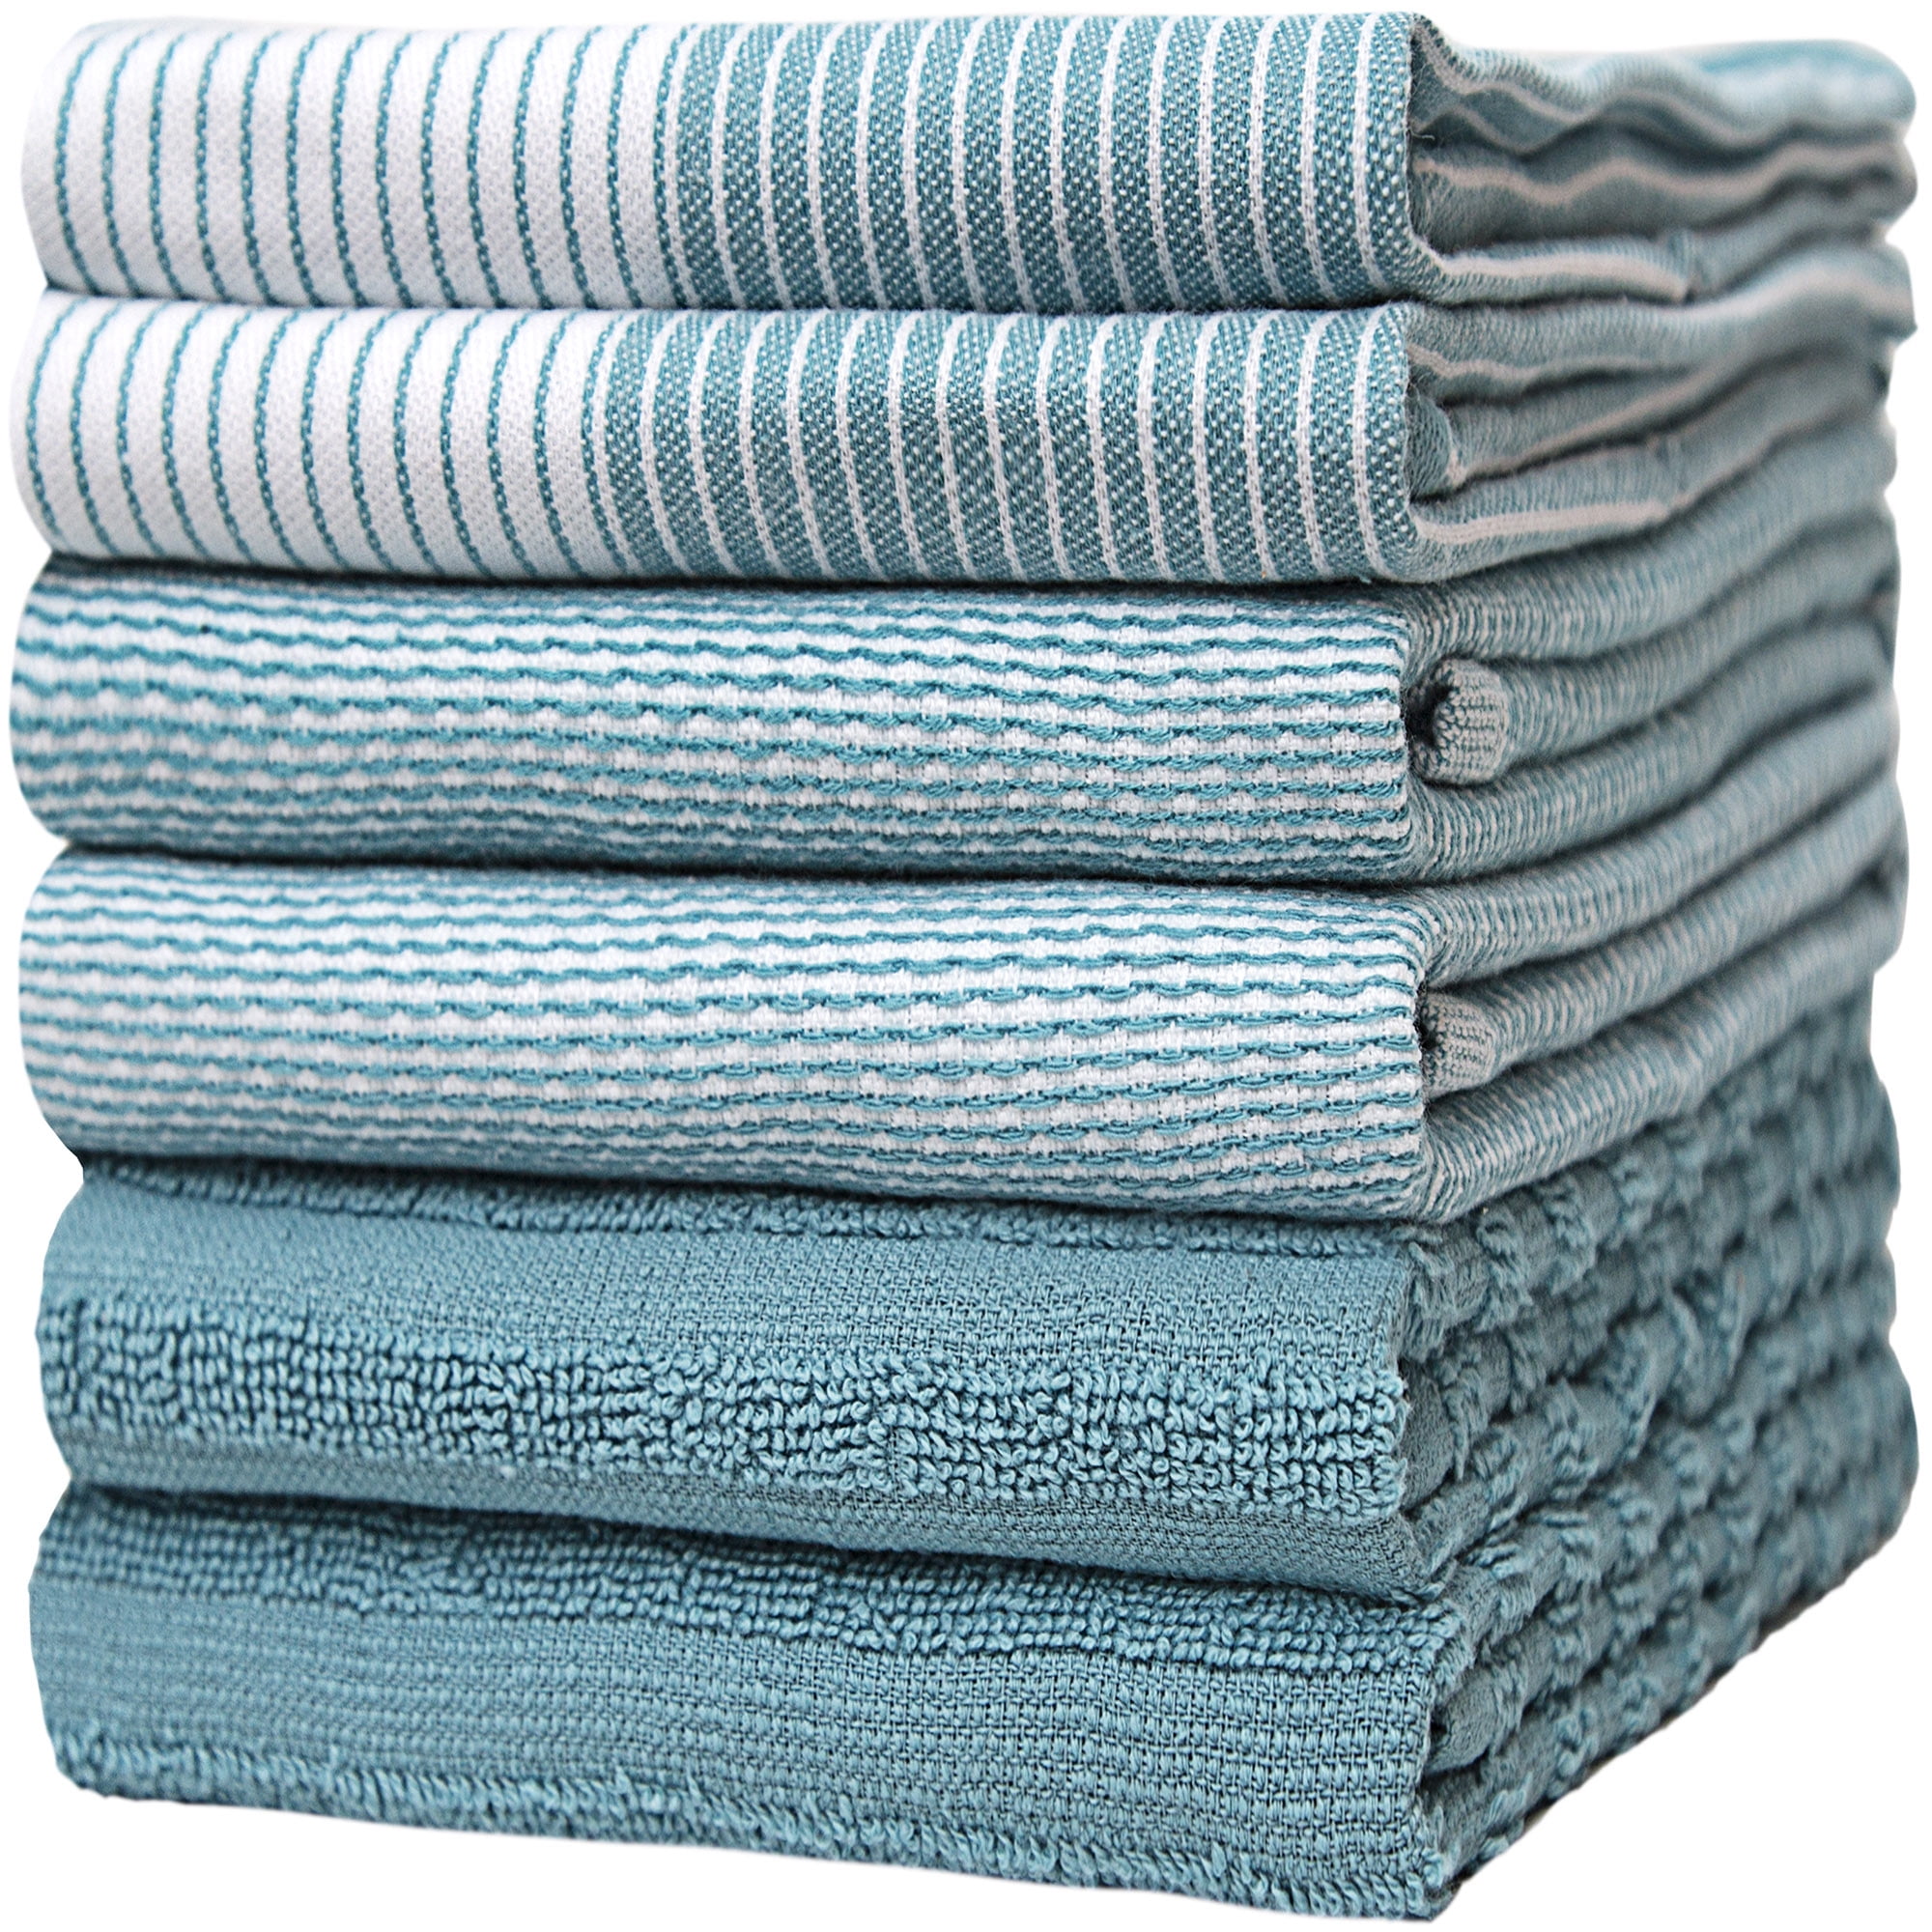 Urban Villa Kitchen Towels Multi Color Set of 6 Terry Kitchen Towels 100%  Cotton Ultra Soft Size 20X30 Inches Highly Absorbent Over Sized Kitchen